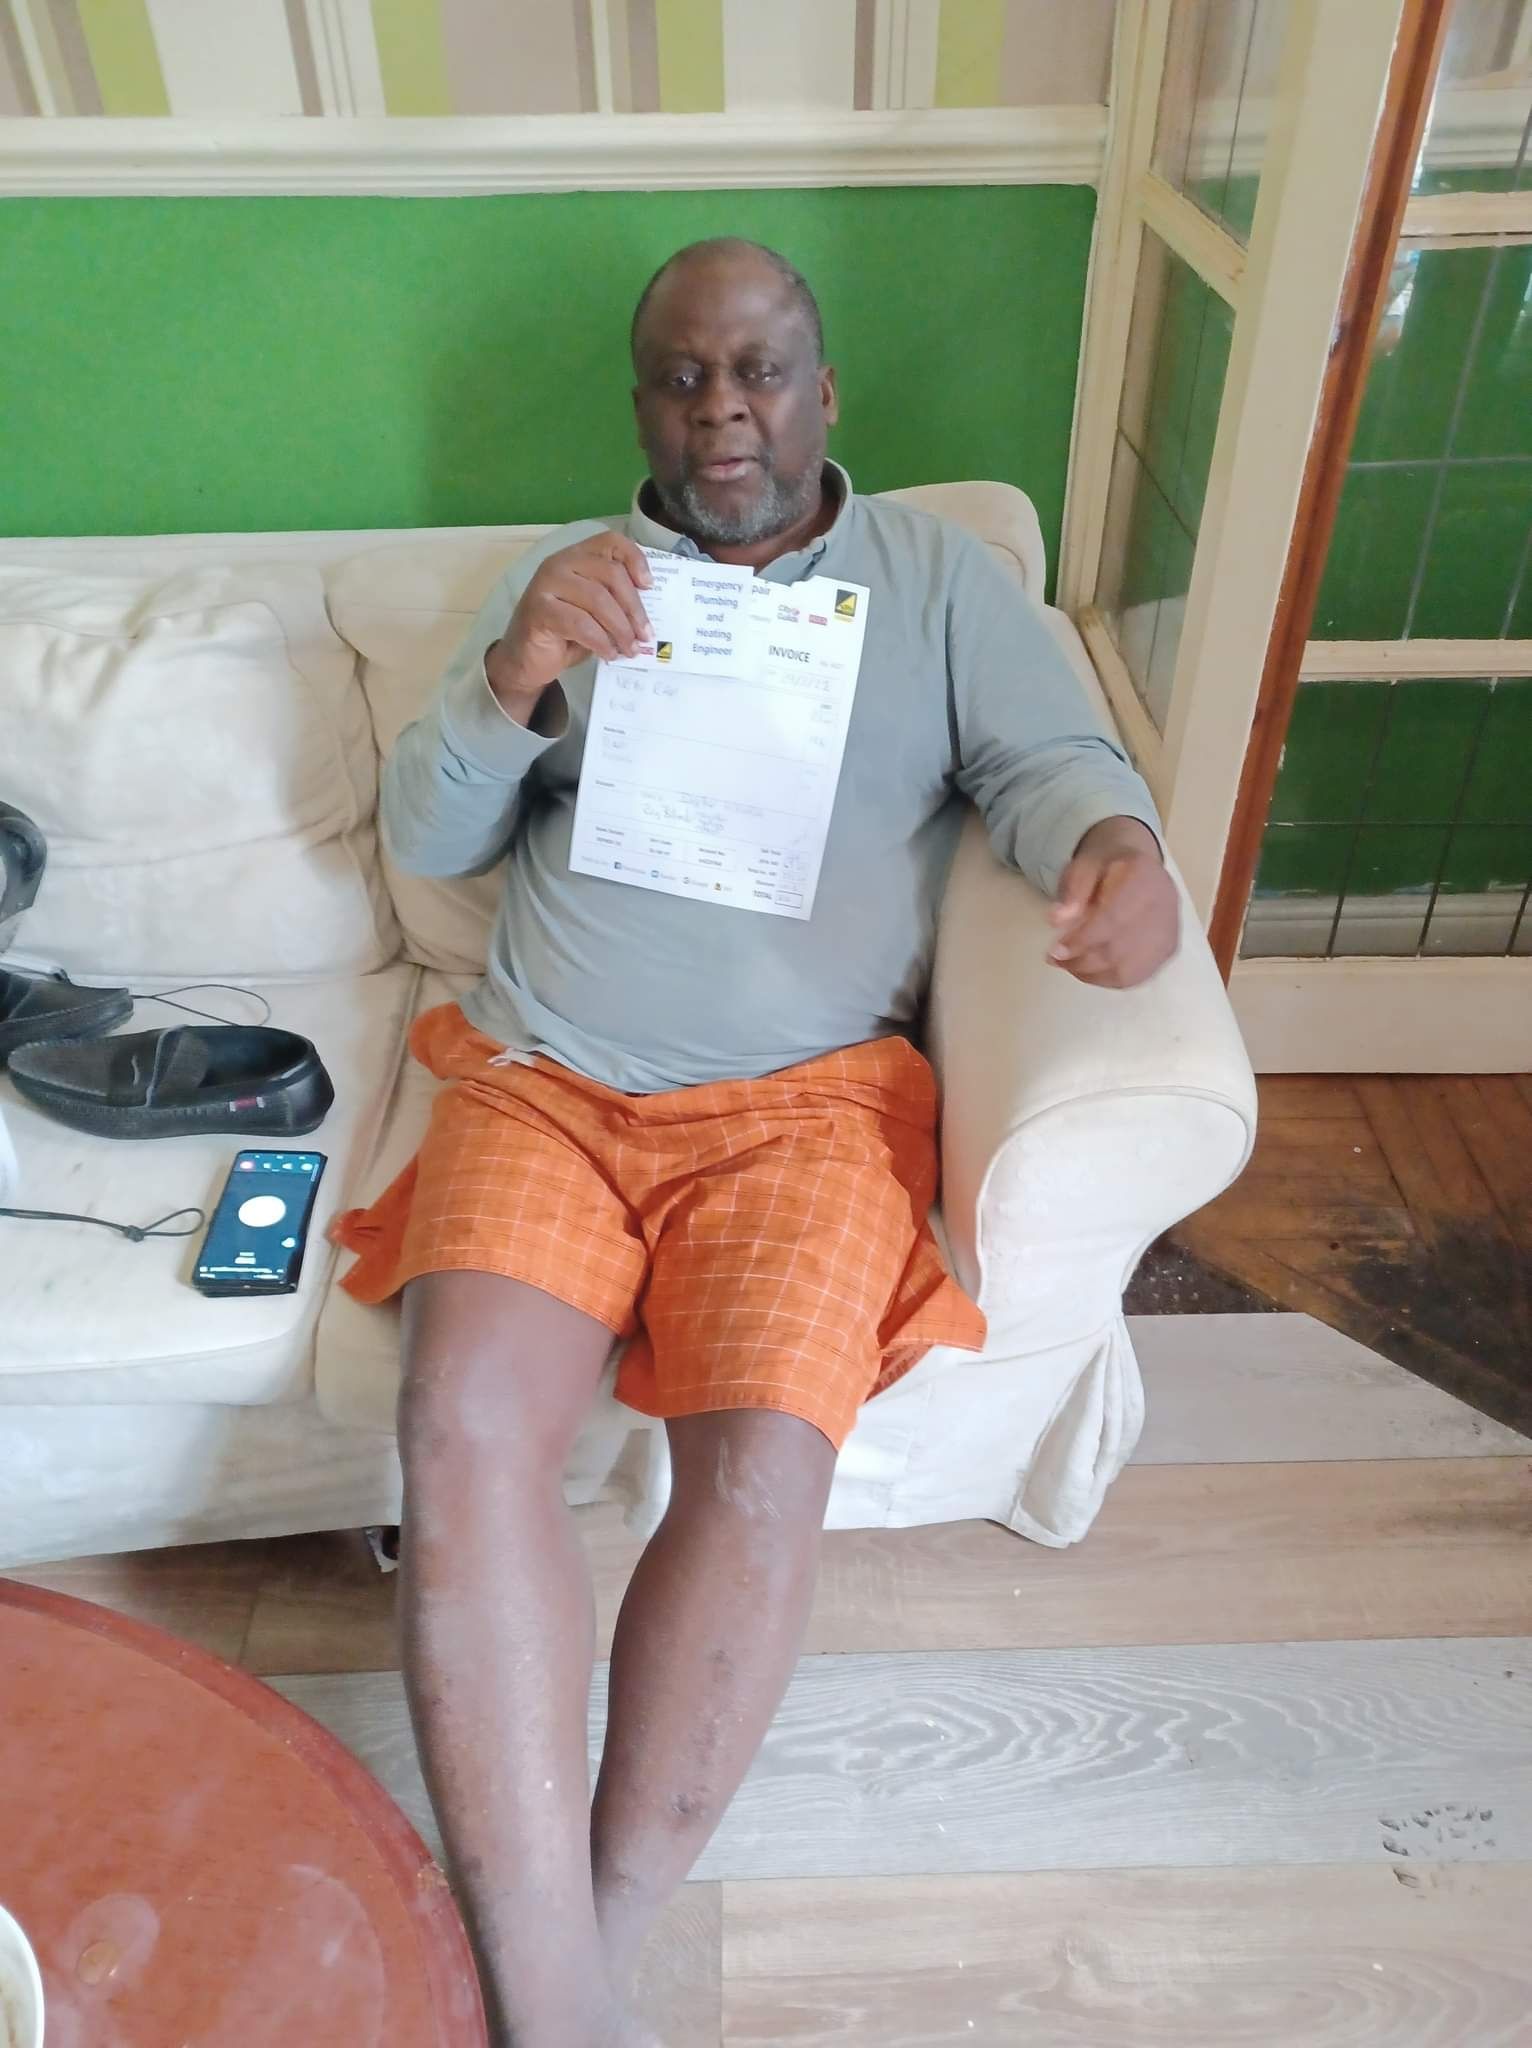 A blind man who received a free emergency boiler through DEPHER this week